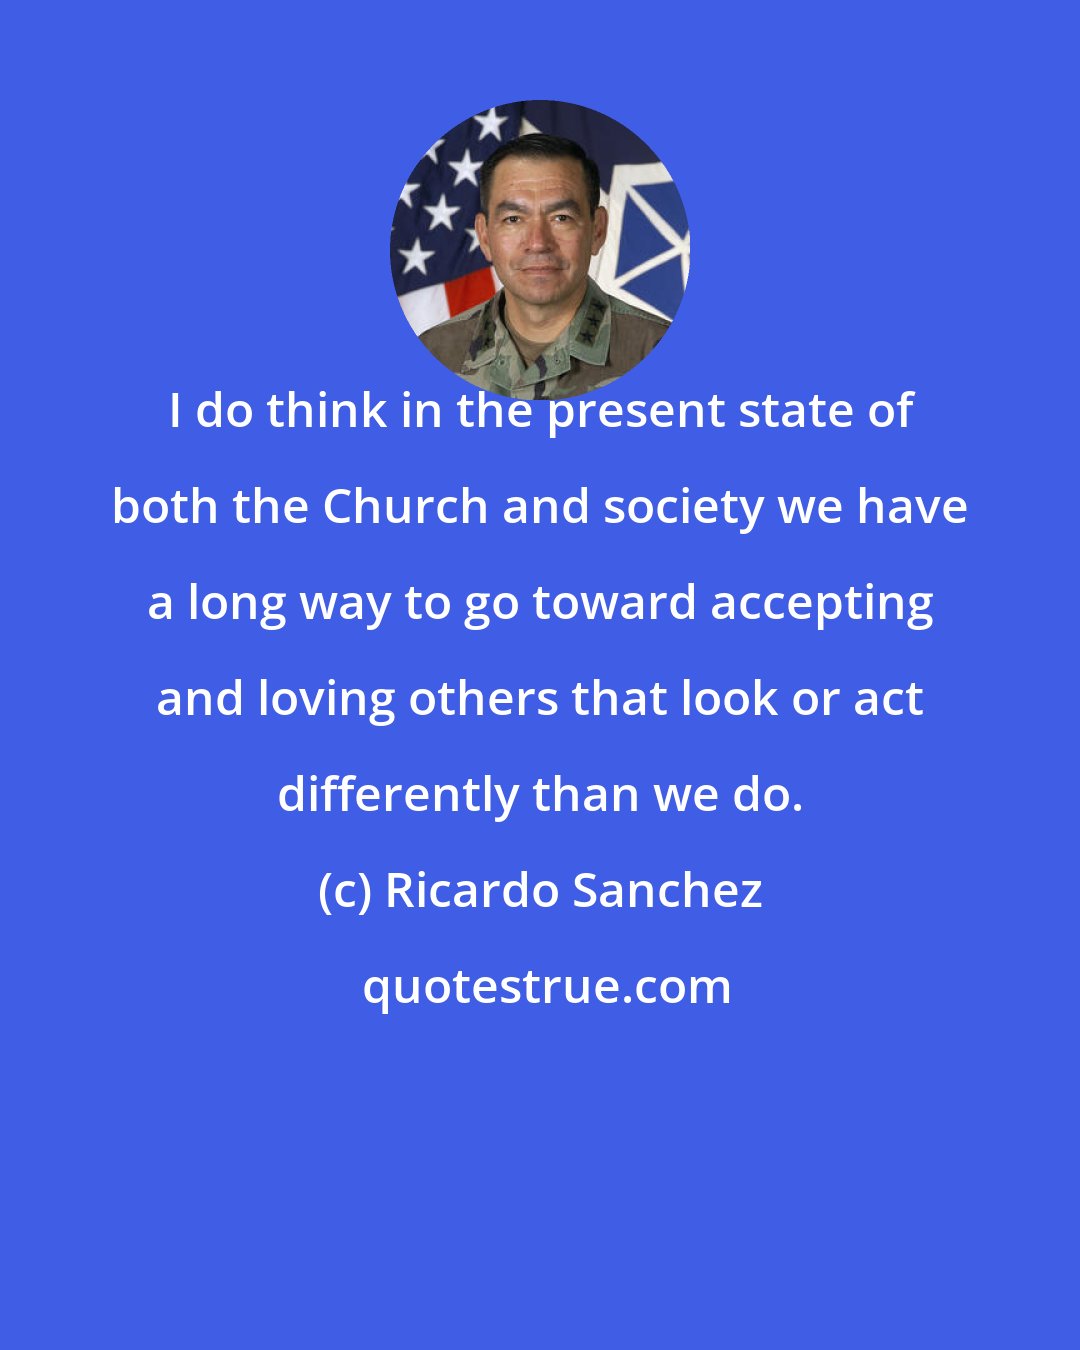 Ricardo Sanchez: I do think in the present state of both the Church and society we have a long way to go toward accepting and loving others that look or act differently than we do.